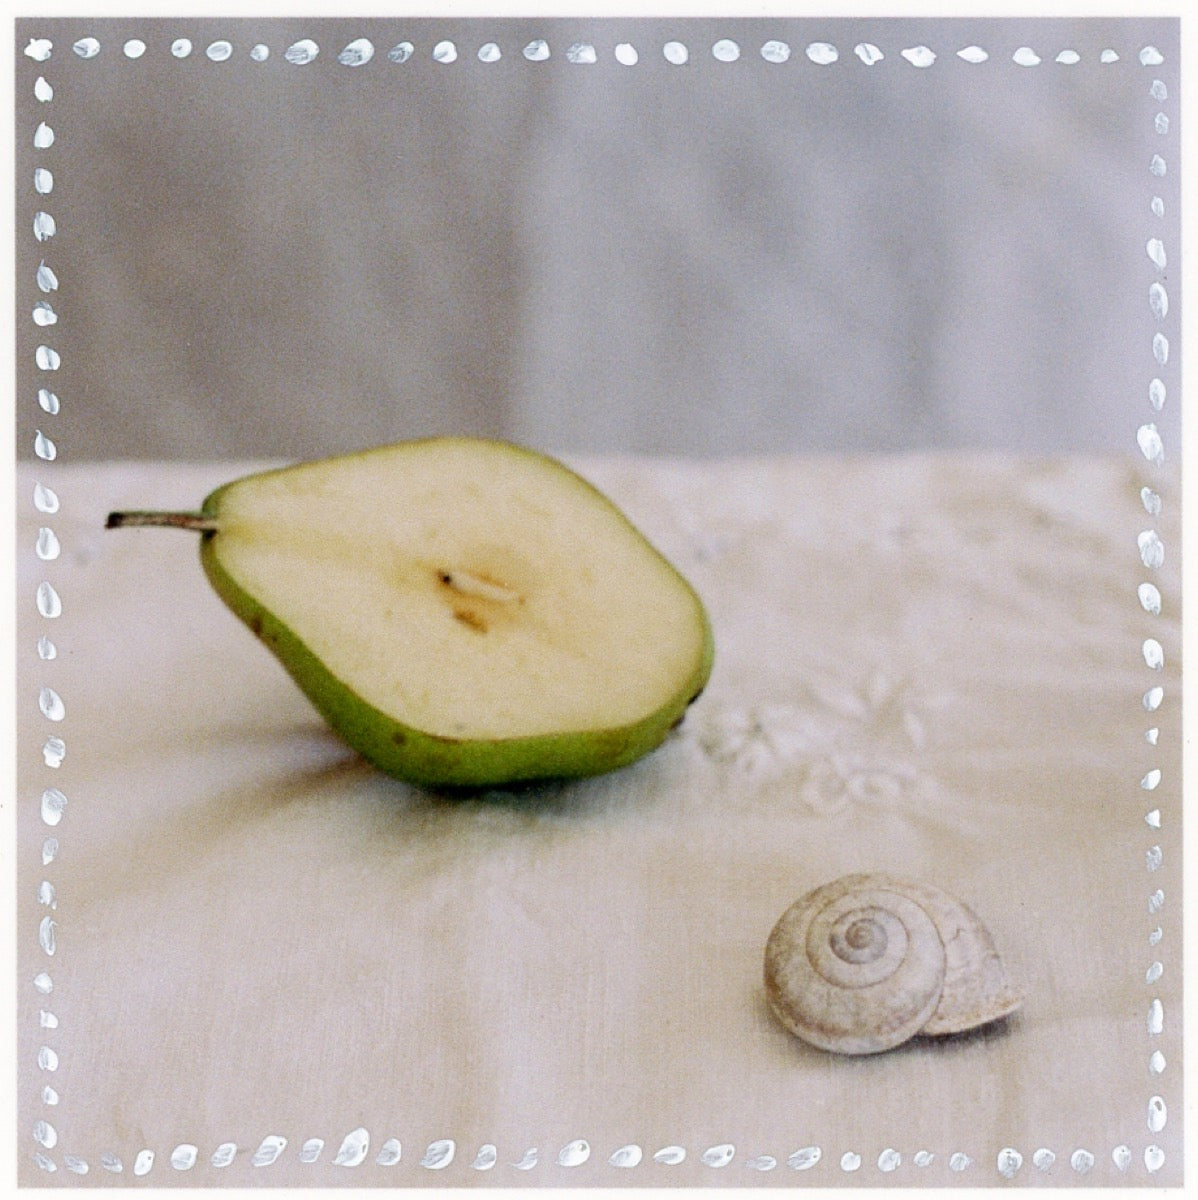 Pear and a Snail Shell